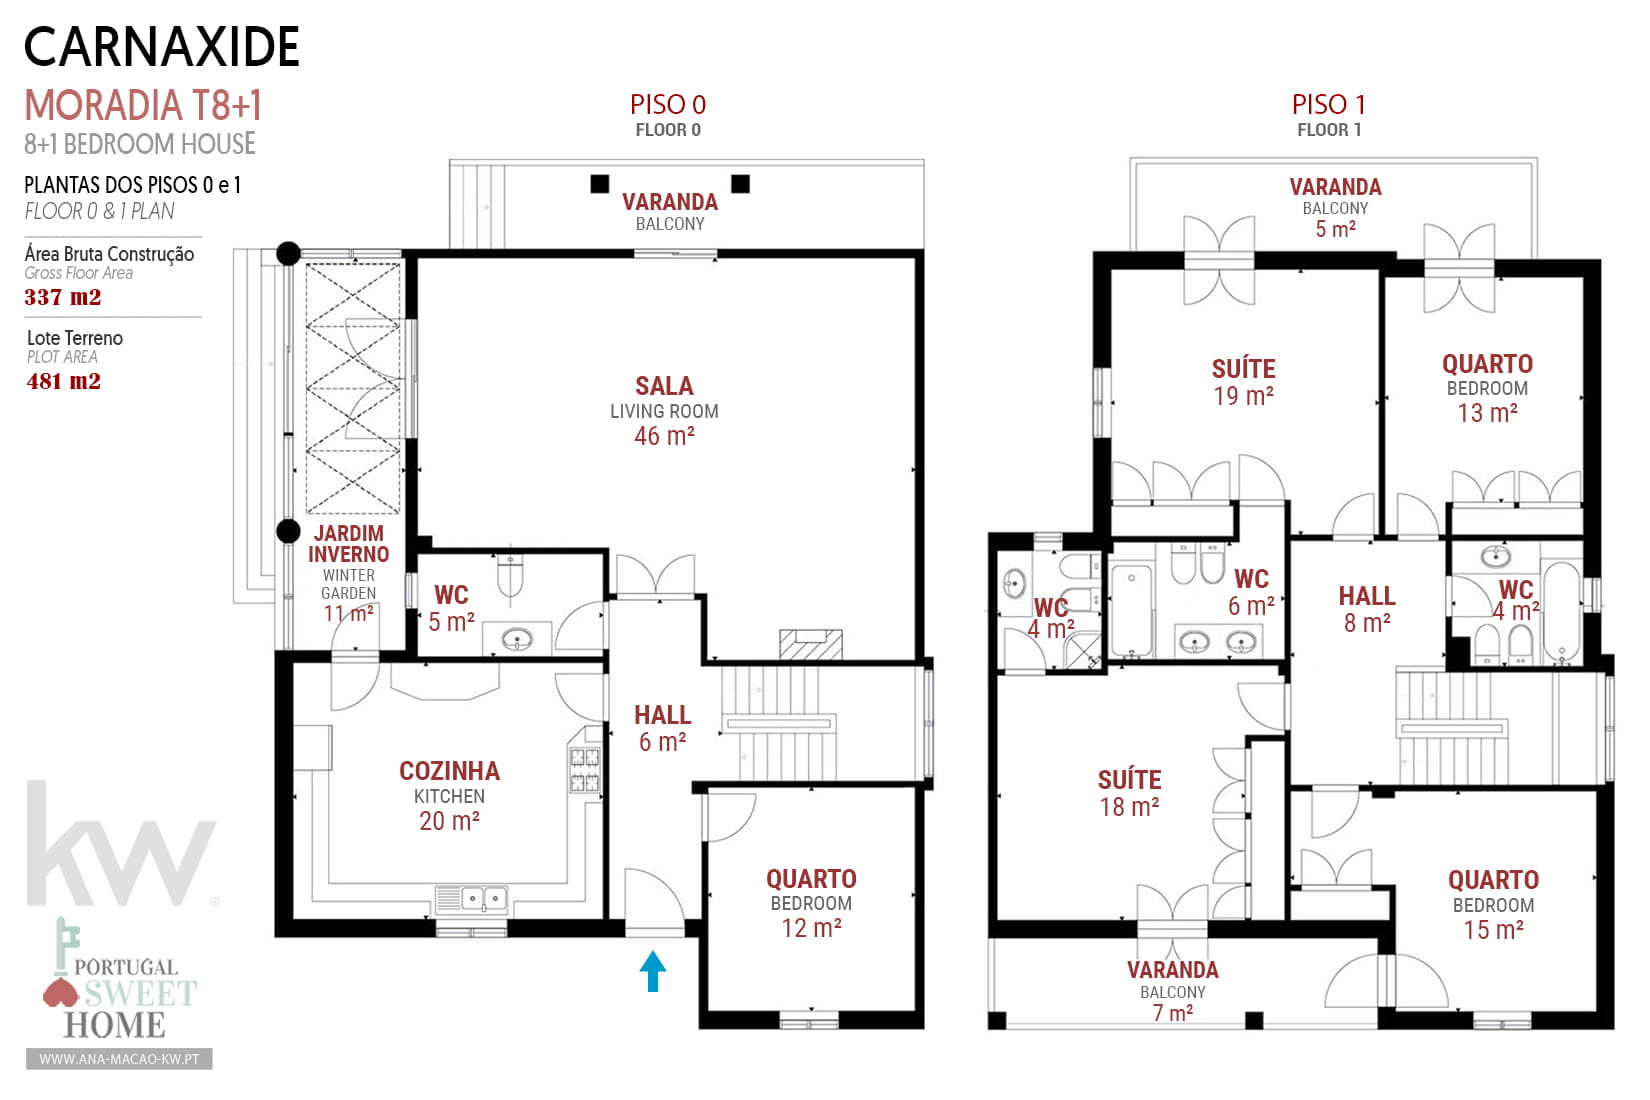 Floor Plans 0 and 1